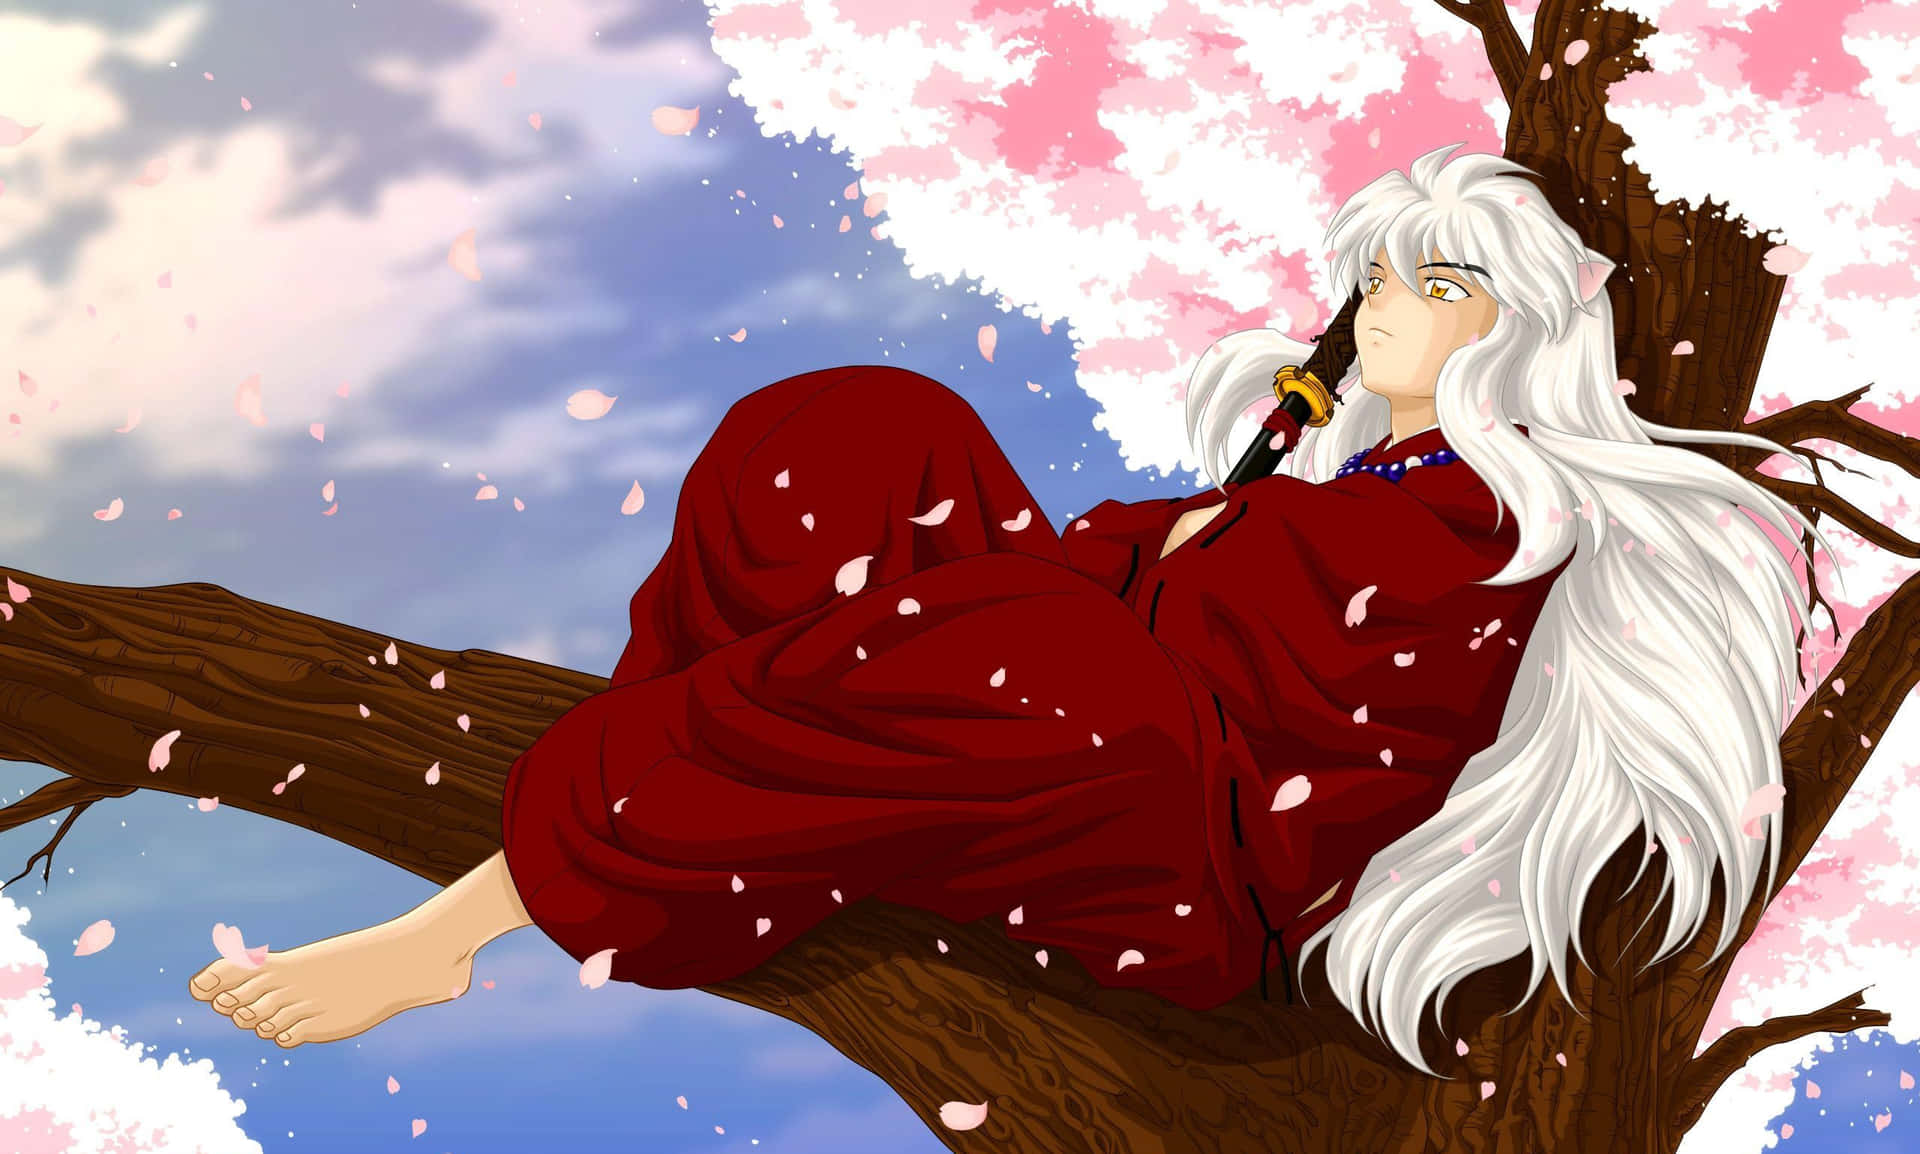 Inuyasha, a mighty half-demon on a quest to restore a powerful ancient jewel.